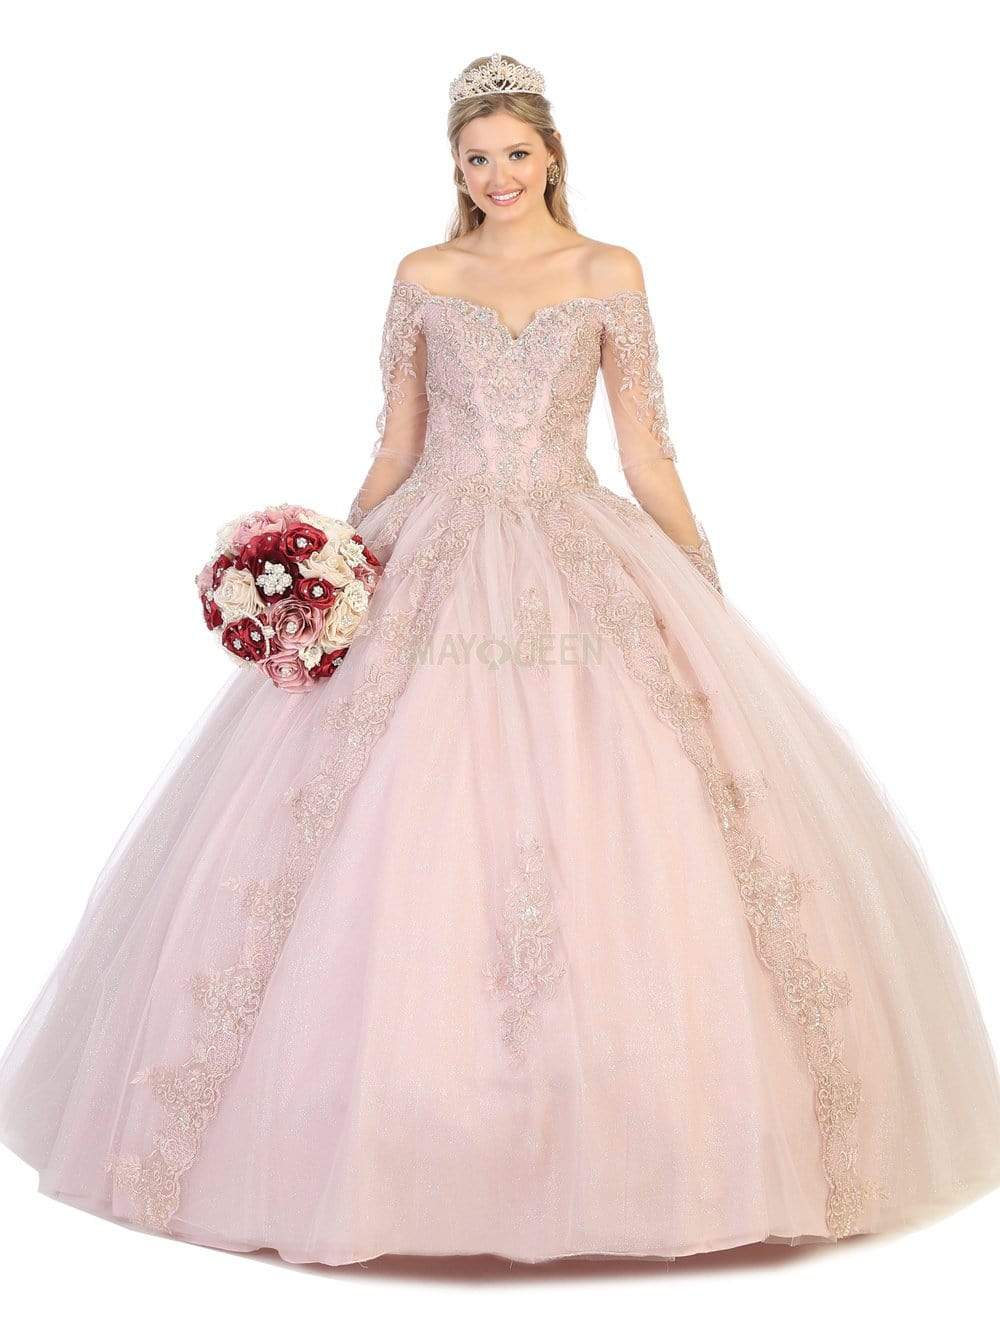 May Queen - LK135 Off Shoulder Embroidered Glitter Ballgown Quinceanera Dresses